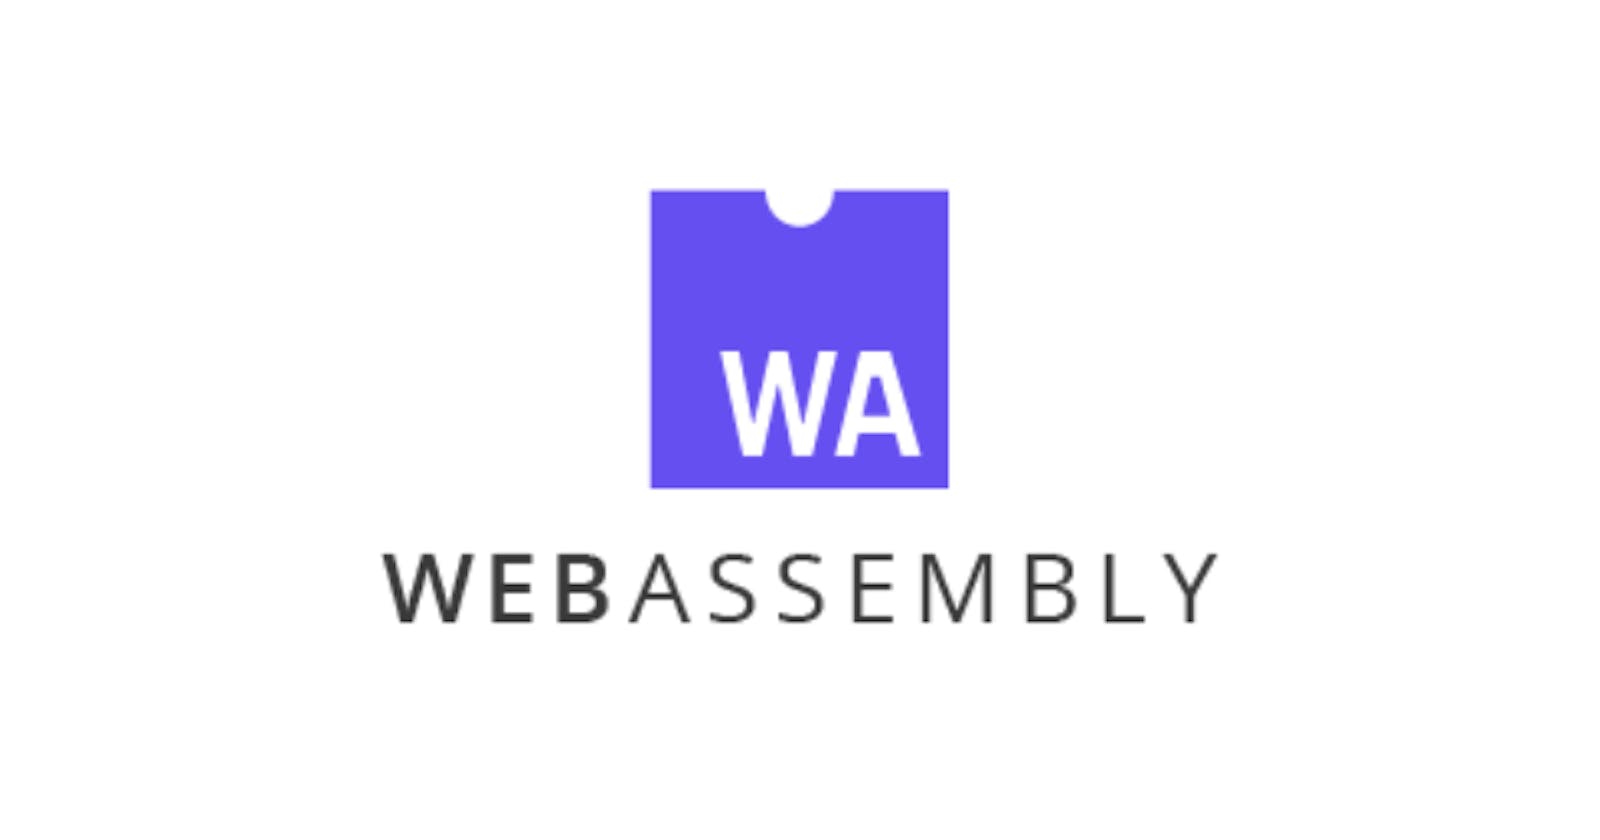 Why and How Webassembly?